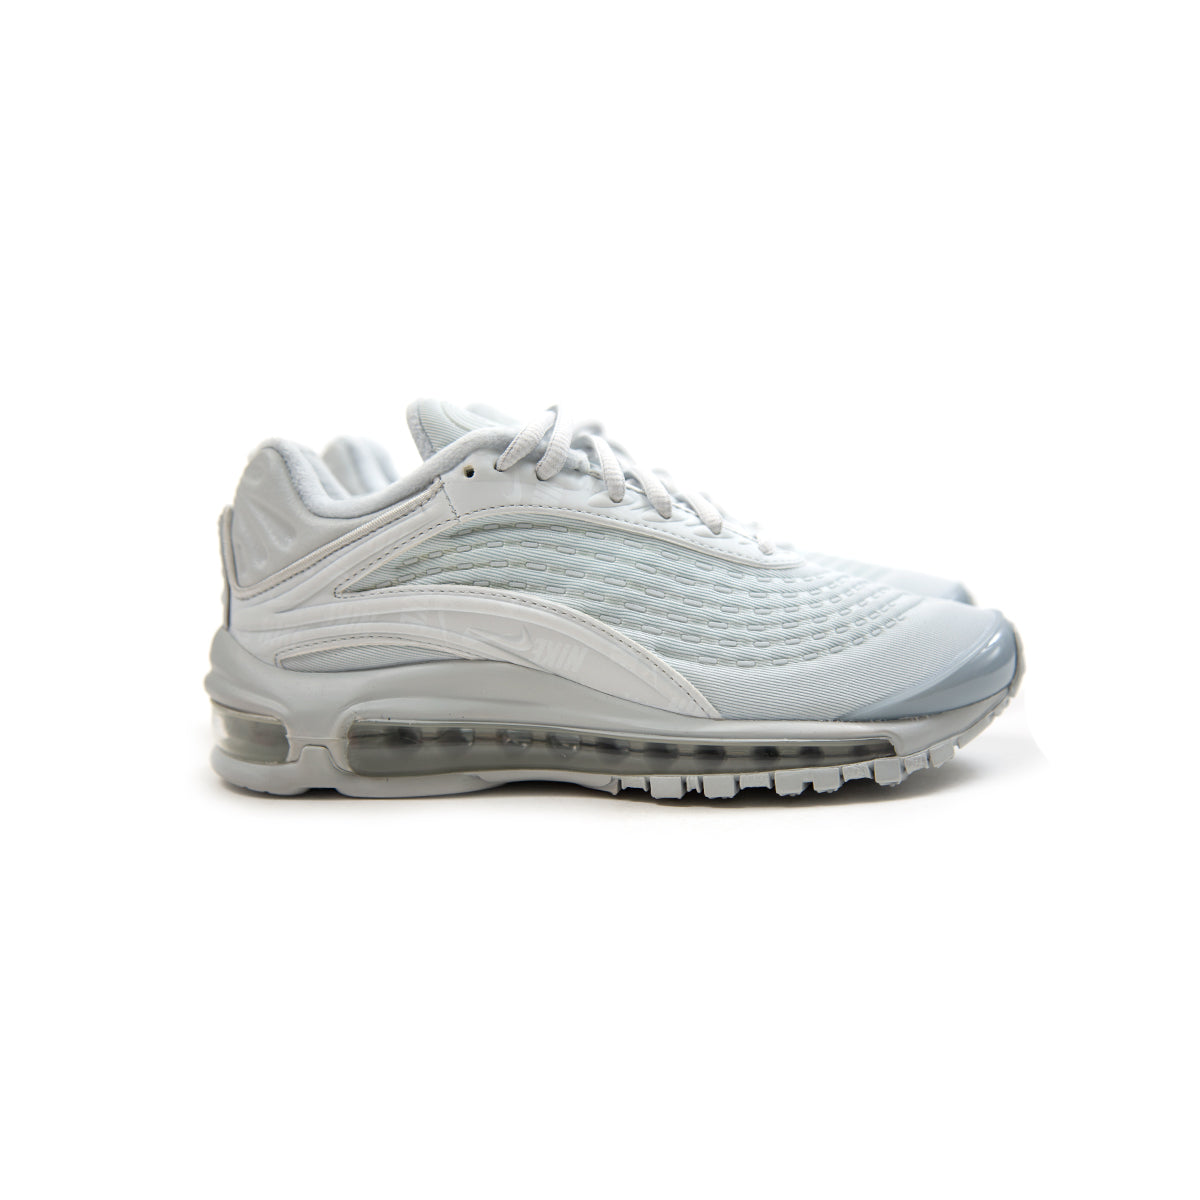 nike air max deluxe se white